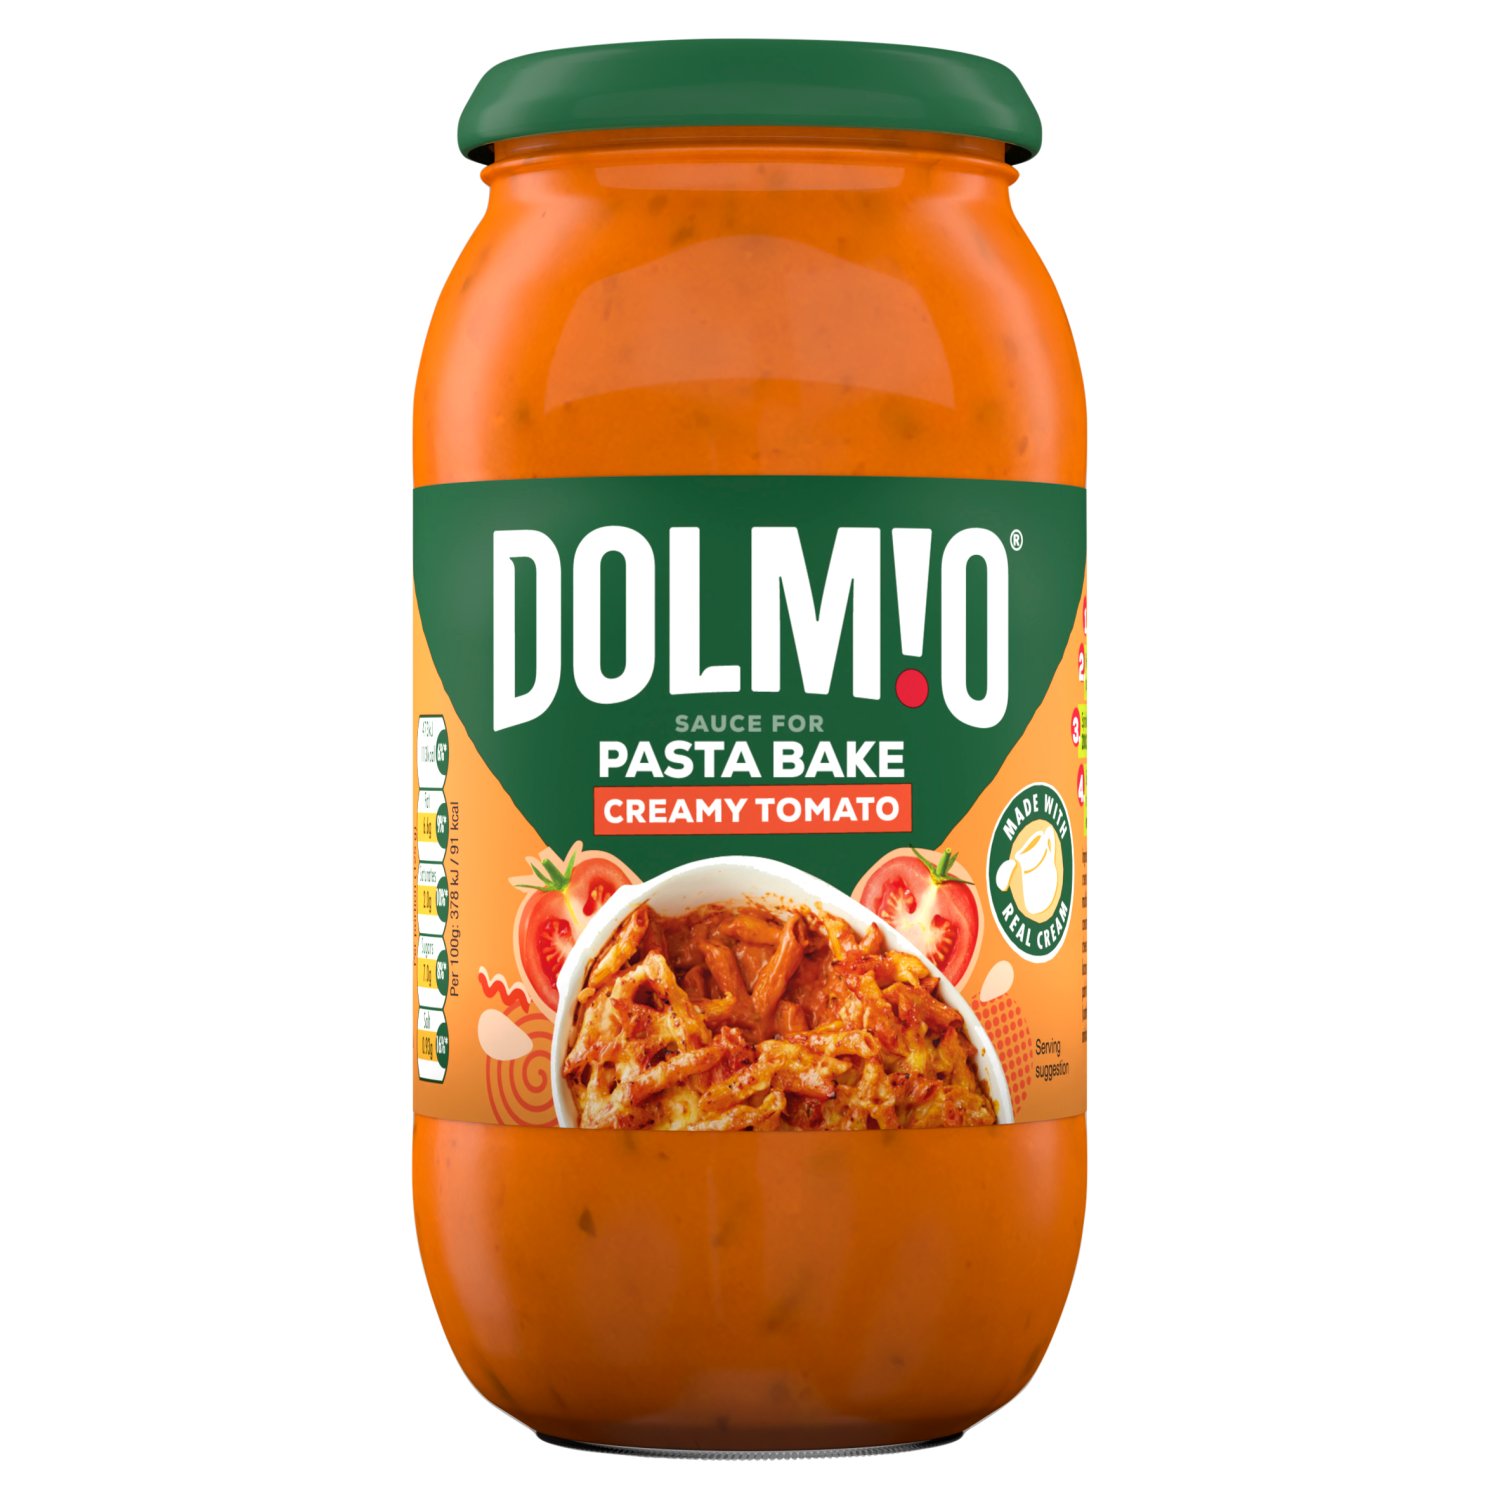 Dolmio Creamy Tomato Pasta Bake Sauce is made with ingredients that are packed with flavour and expertly blended, and contains no artificial colours or flavours. This Creamy Tomato pasta sauce helps you create a great tasting golden pasta bake so you can sit back and relax in anticipation of a deliciously creamy and cheesy oven bake pasta dish everyone will love. Pretend it’s your secret family recipe, mwahahaha. Enjoy this indulgent meal as part of a balanced weekly diet.